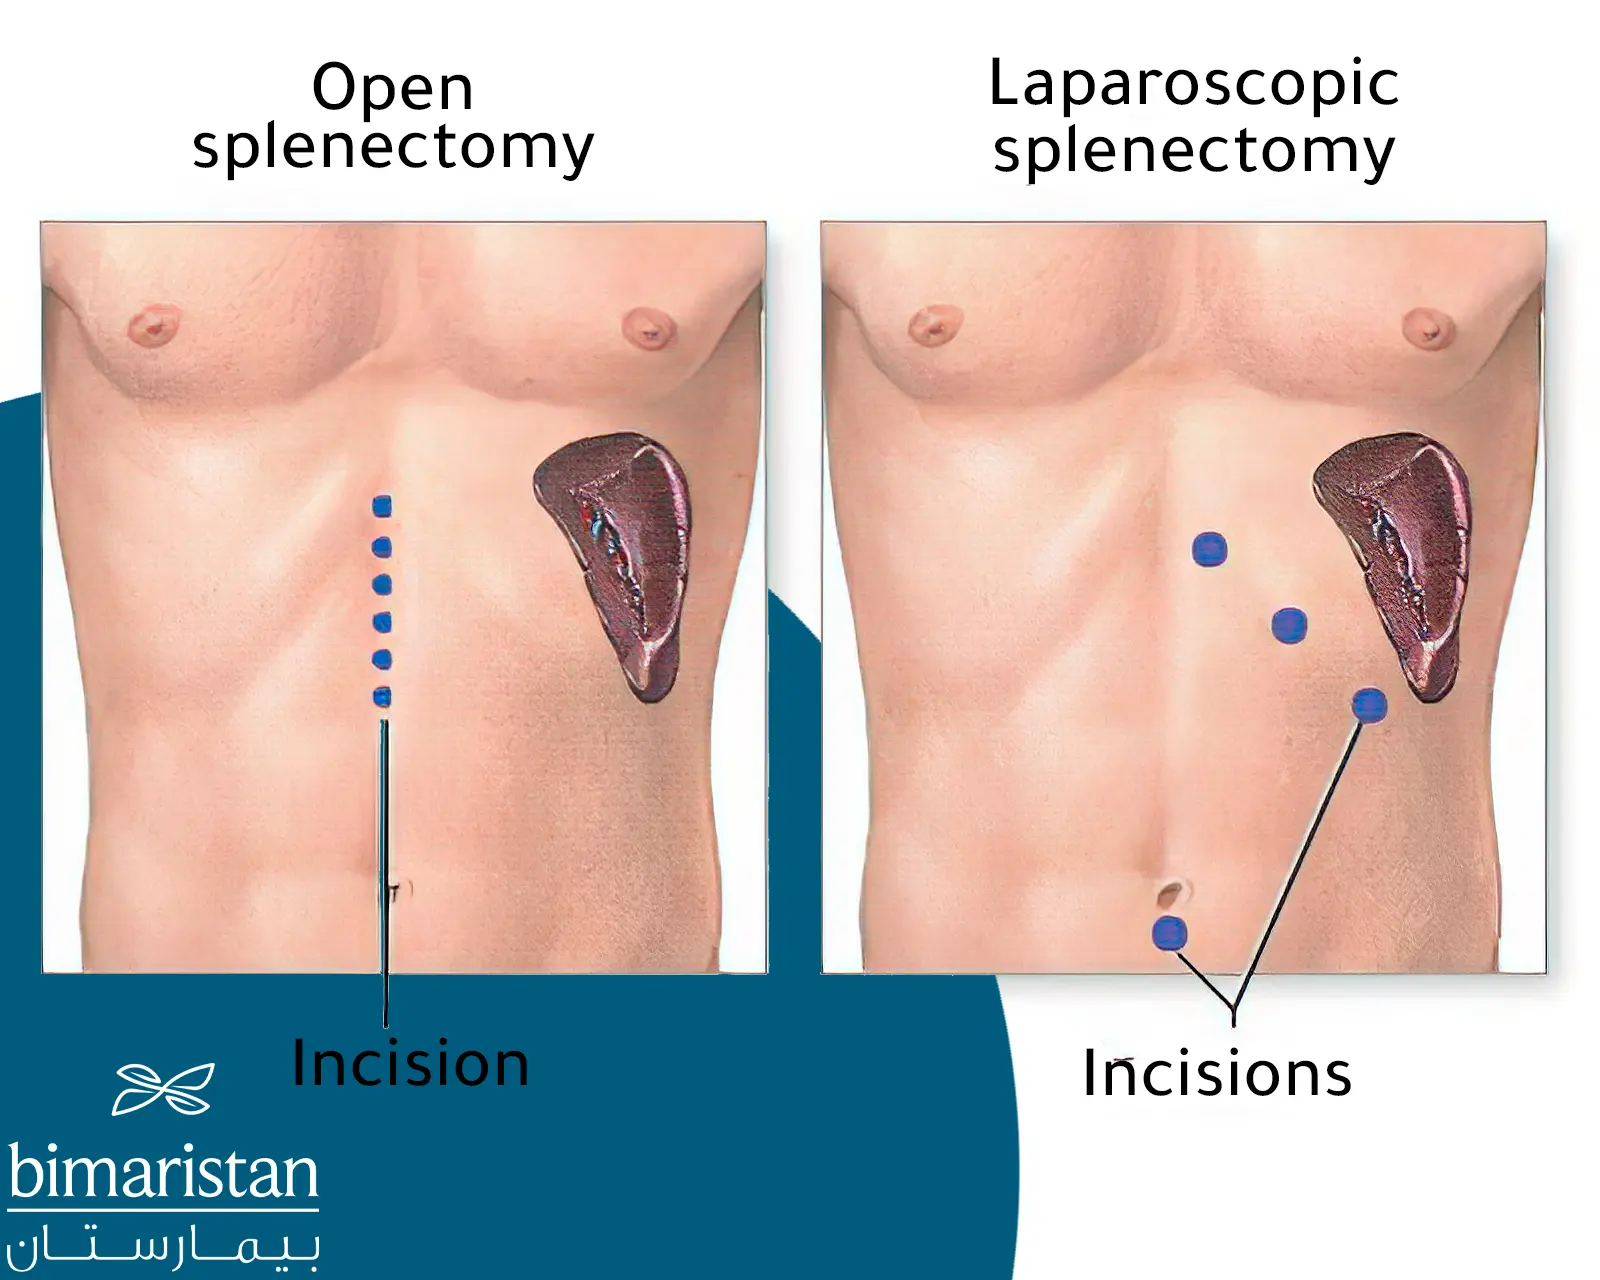 Difference between open and laparoscopic splenectomy in Turkey